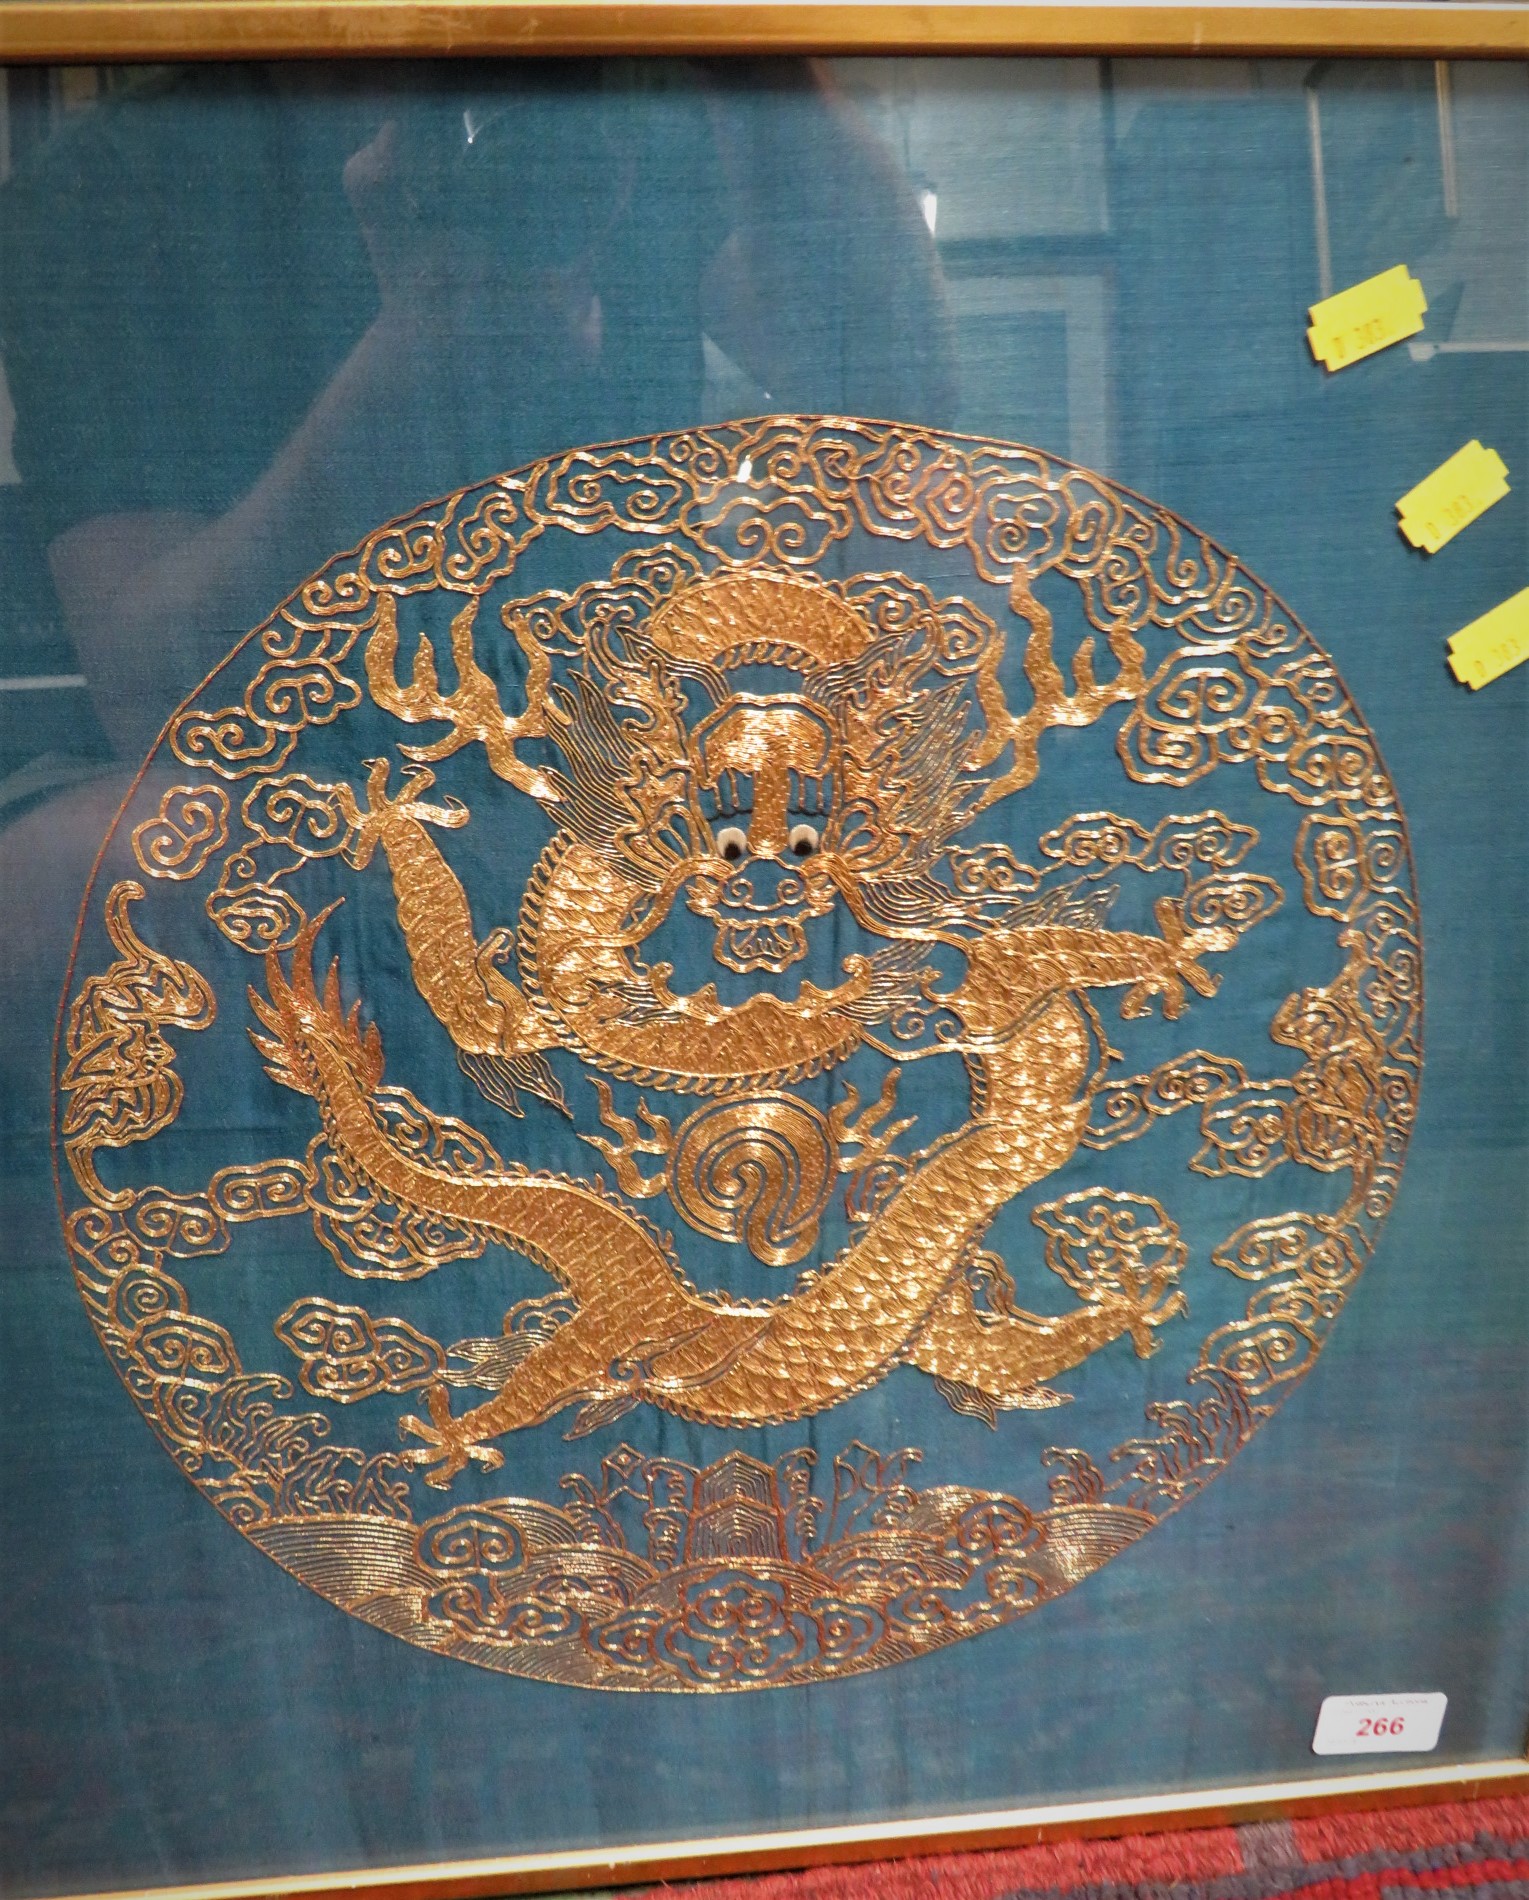 FRAMED AND GLAZED EMBROIDERY IN GOLD COLOURED THREAD DEPICTING CHINESE DRAGON WITH STYLIZED CLOUDS - Image 2 of 8